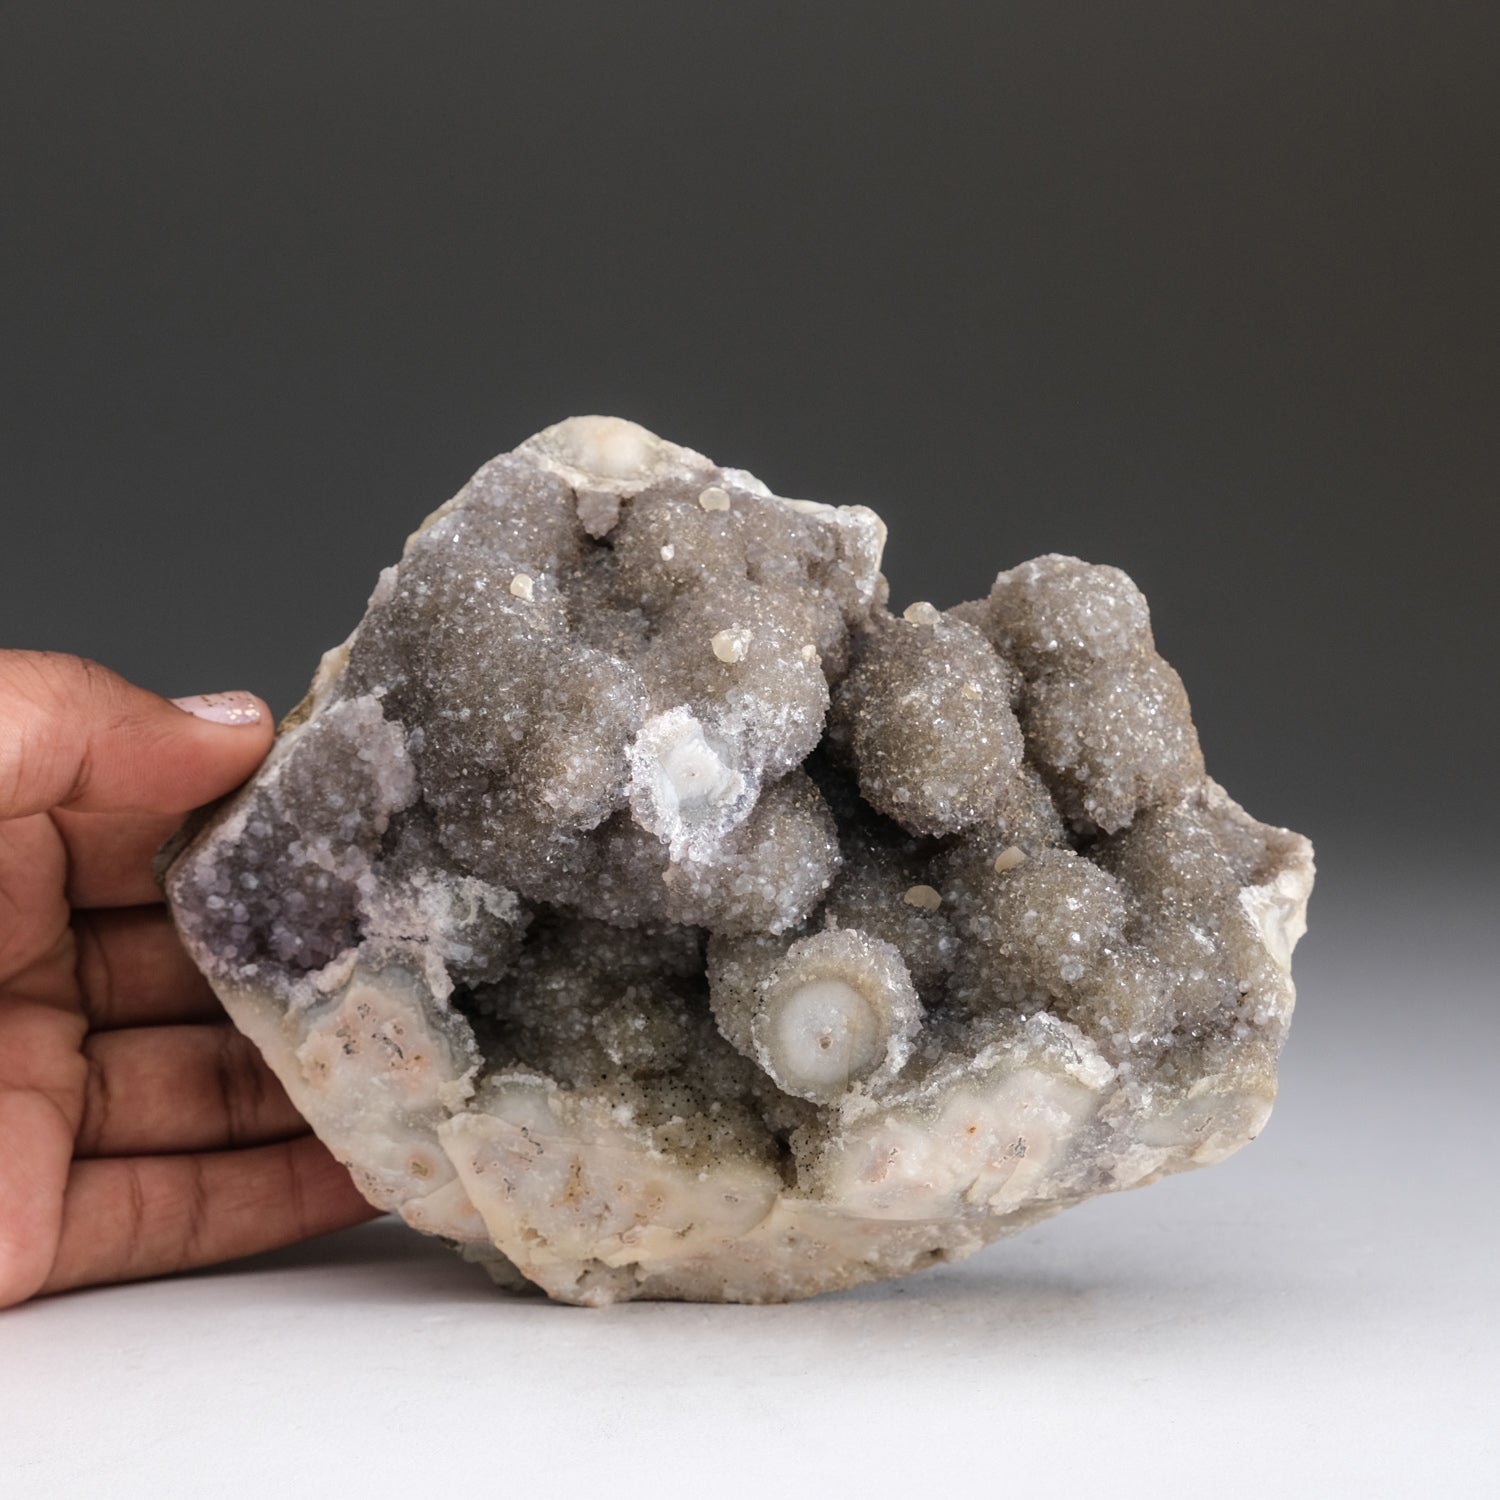 Druzy Crystal Cluster Geode from Uruguay (2.2 lbs)